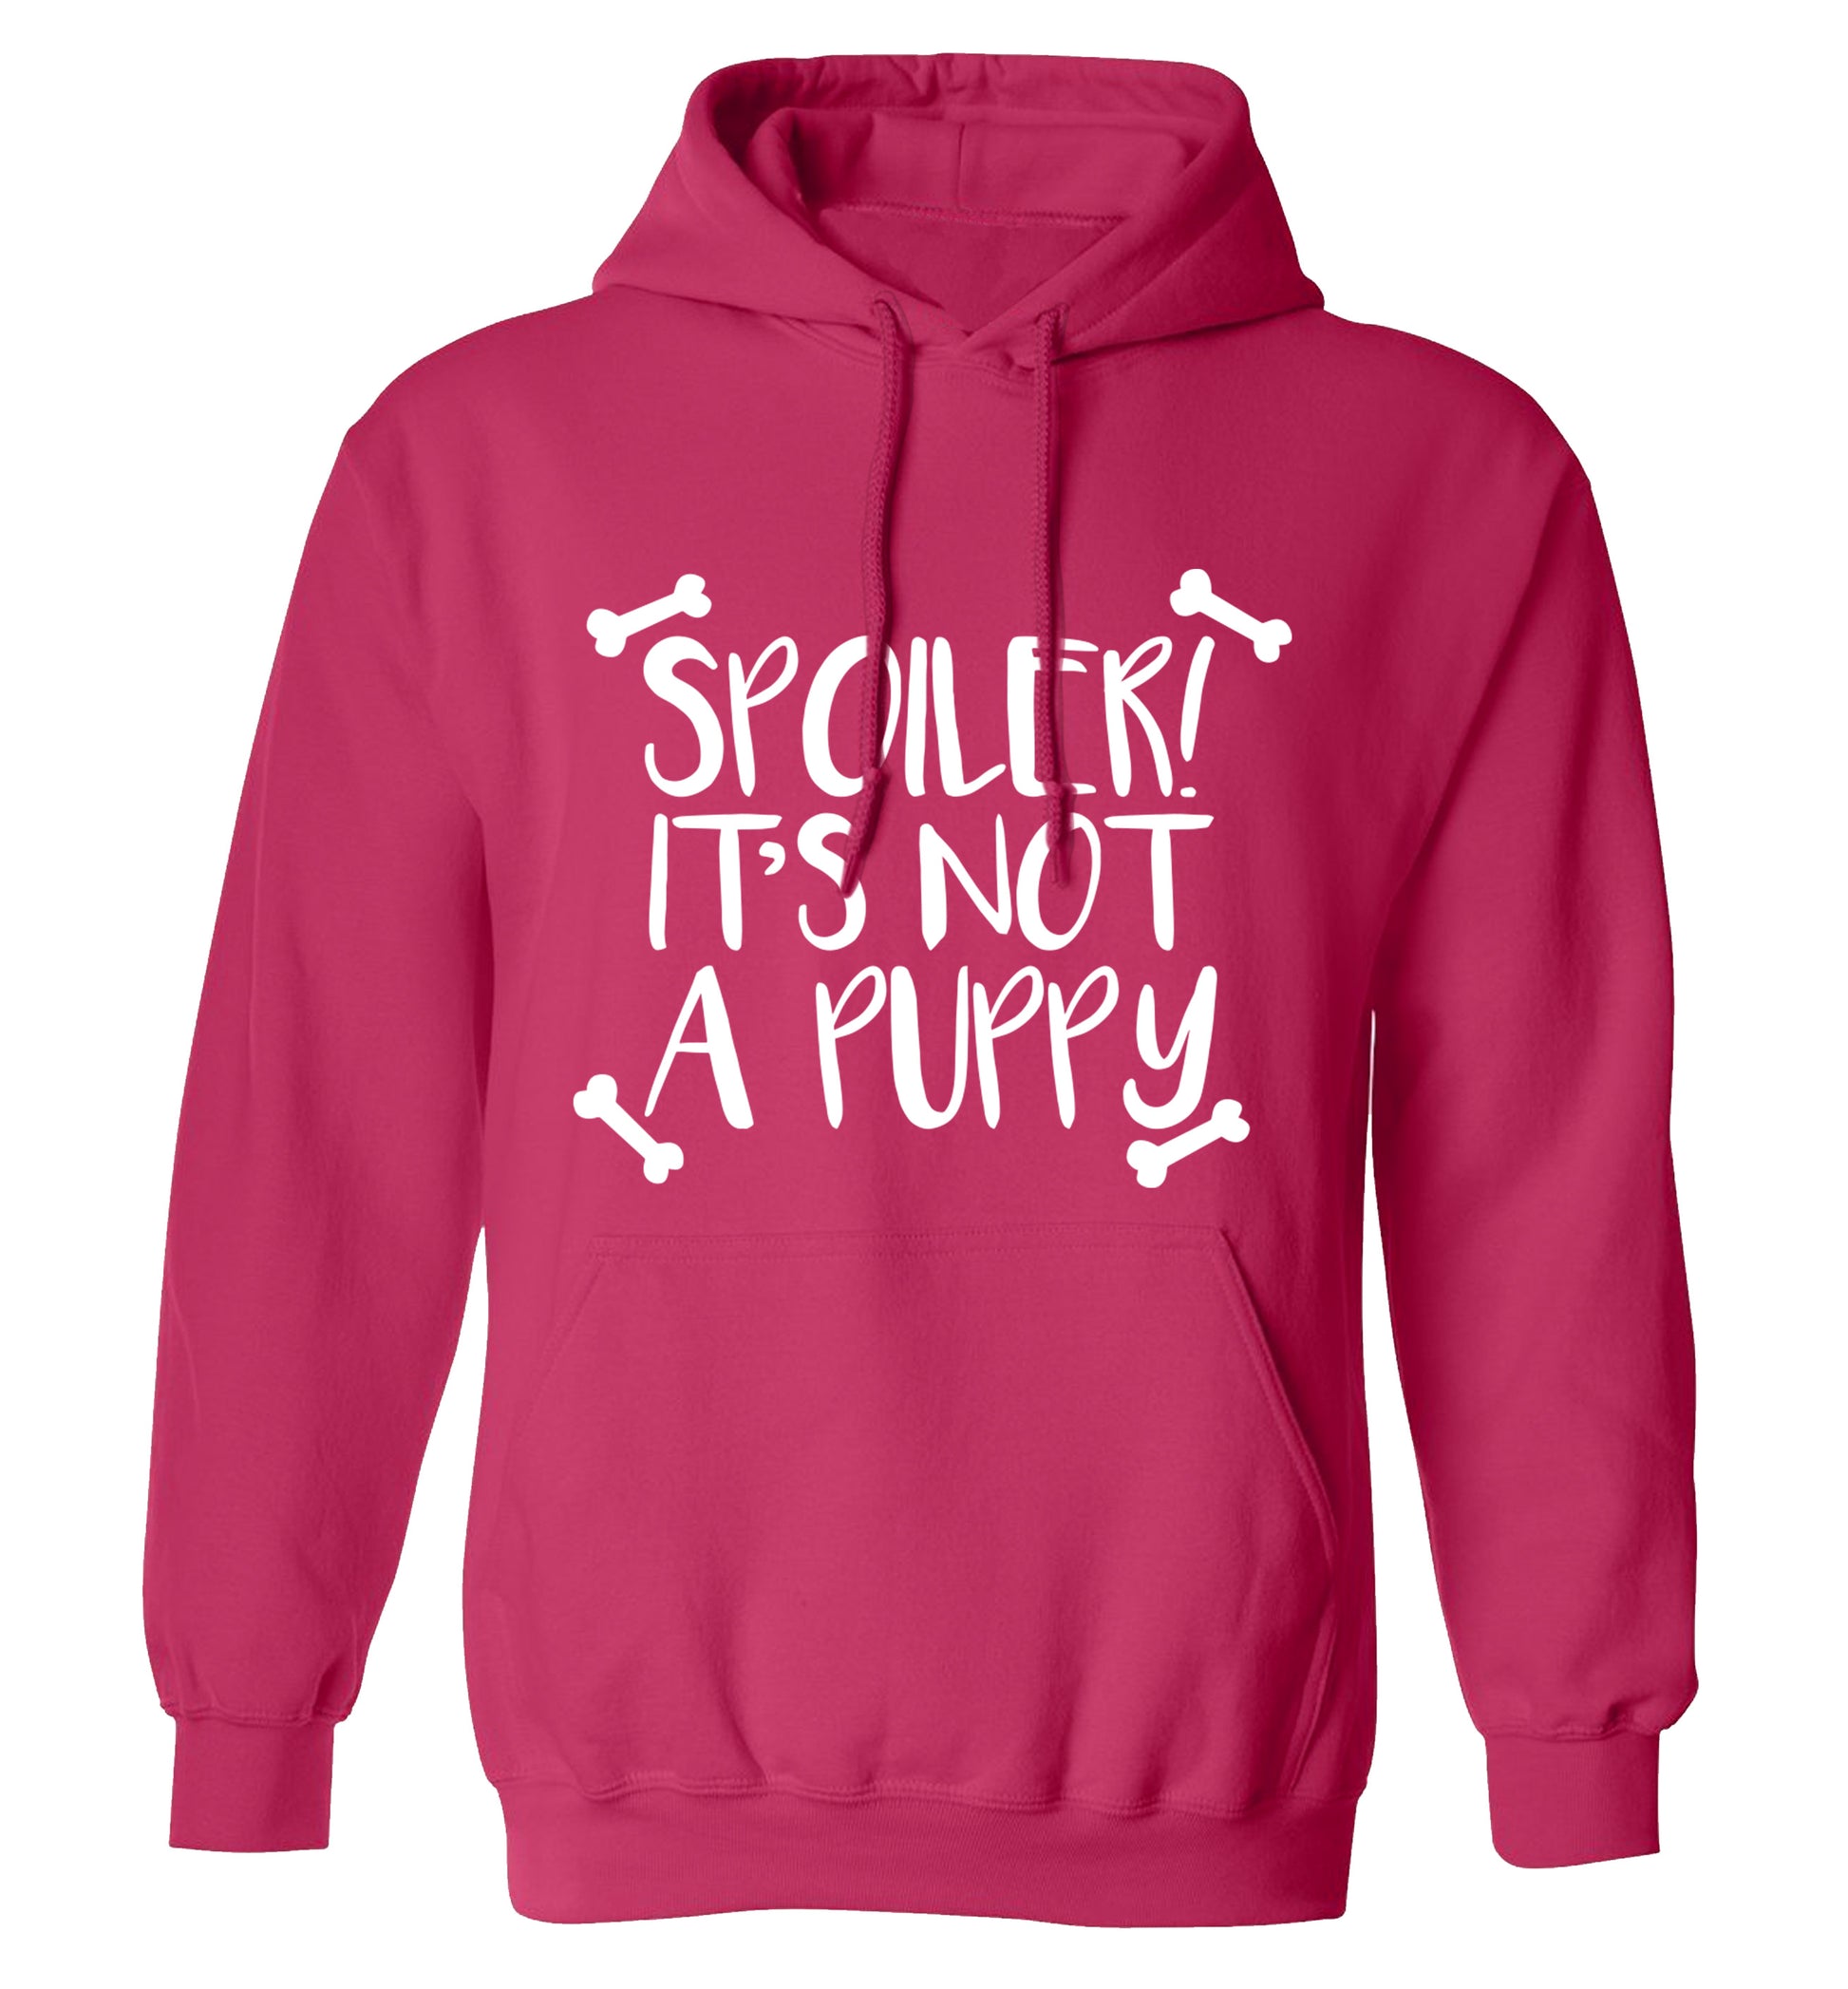 Spoiler it's not a puppy adults unisex pink hoodie 2XL